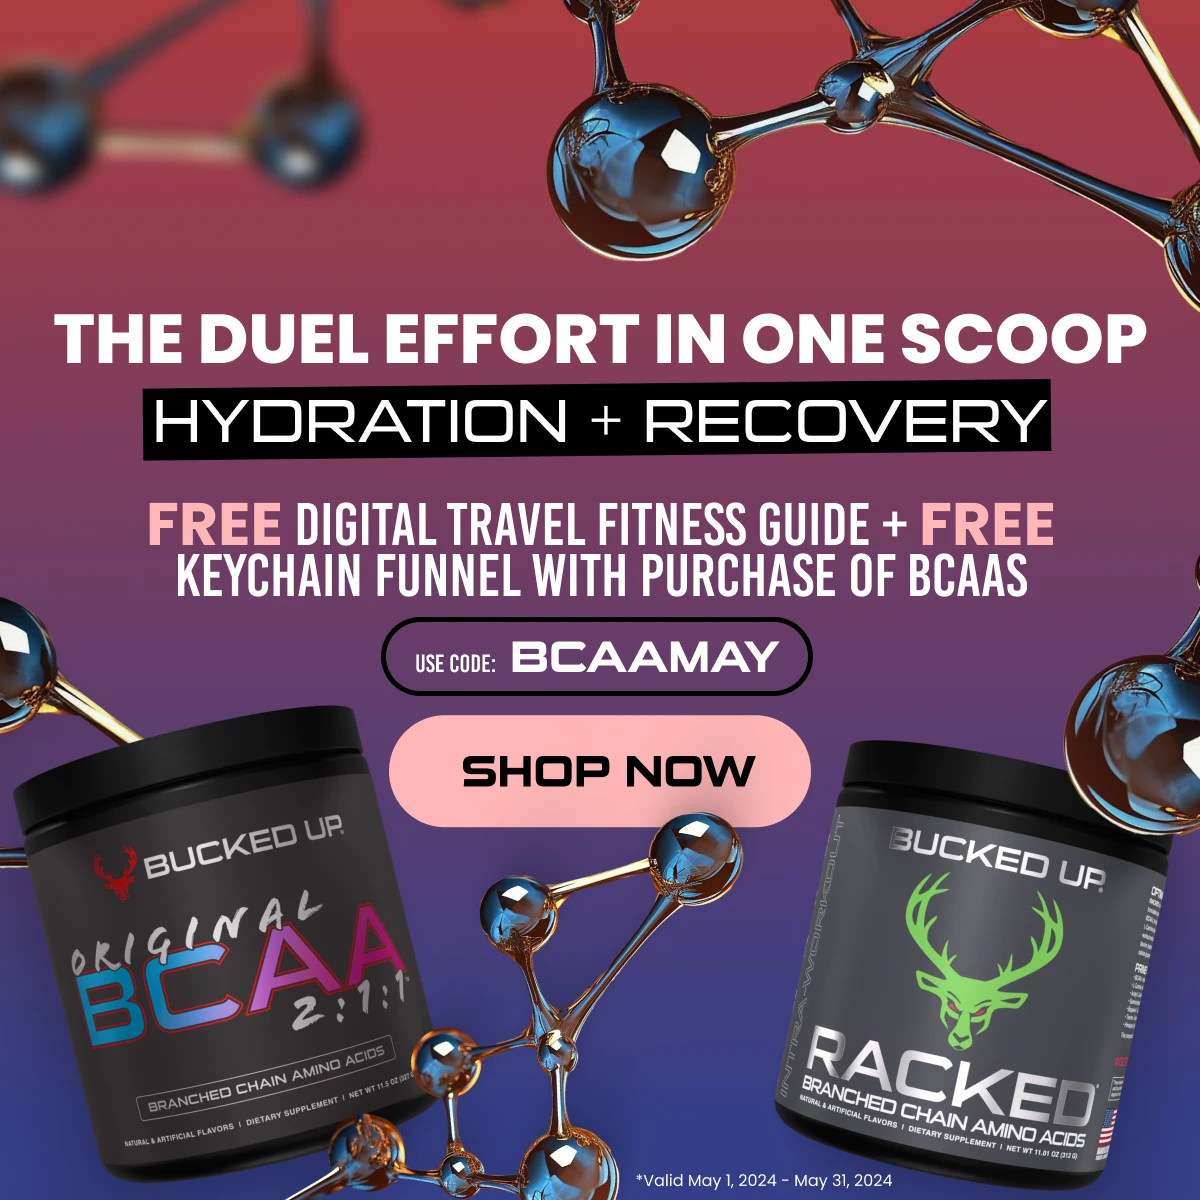 BCAA May - Text reads "the duel effort in one scoop, hydration + recovery, free digital travel fitness guide + free keychain funnel with purchase of BCAAs, use code: bcaamay".  Button reads "shop now".  Subtext reads "valid may 1,